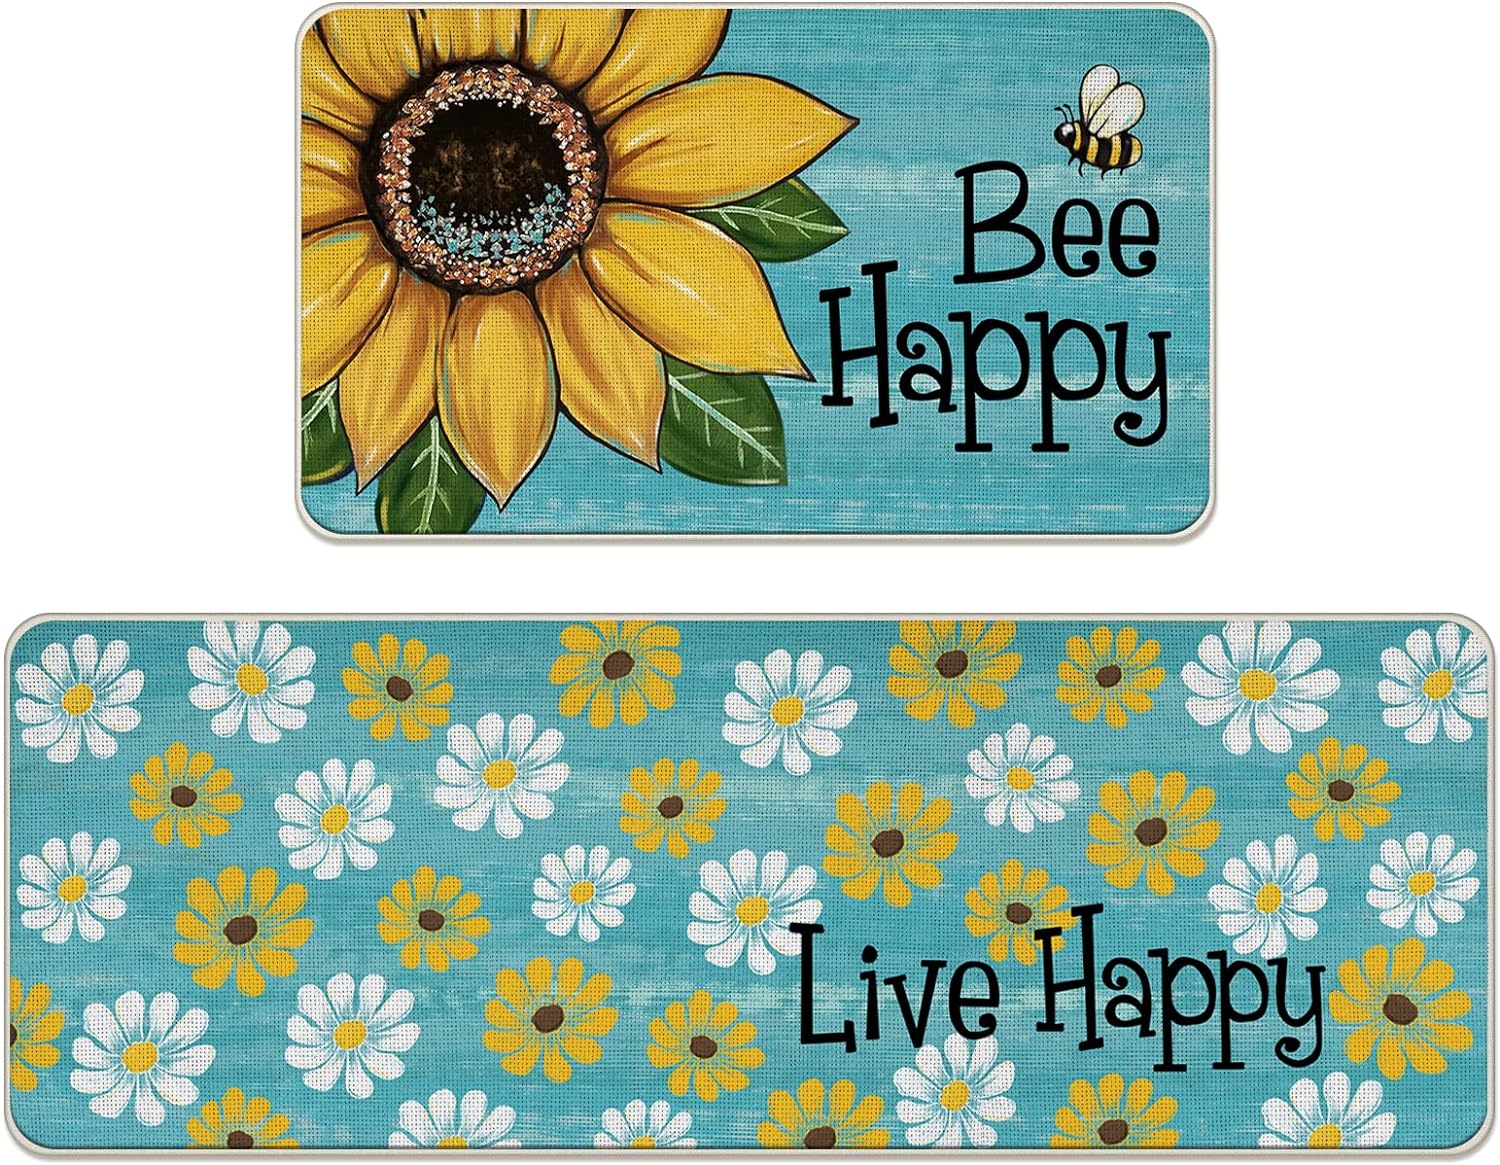 Spring Summer Bee Happy Kitchen Rugs Set of 2, Live Happy Sunflower Floral Blue Kitchen Mats Decor, Seasonal Floor Door Mat Home Decorations -17×29 and 17×47 Inch